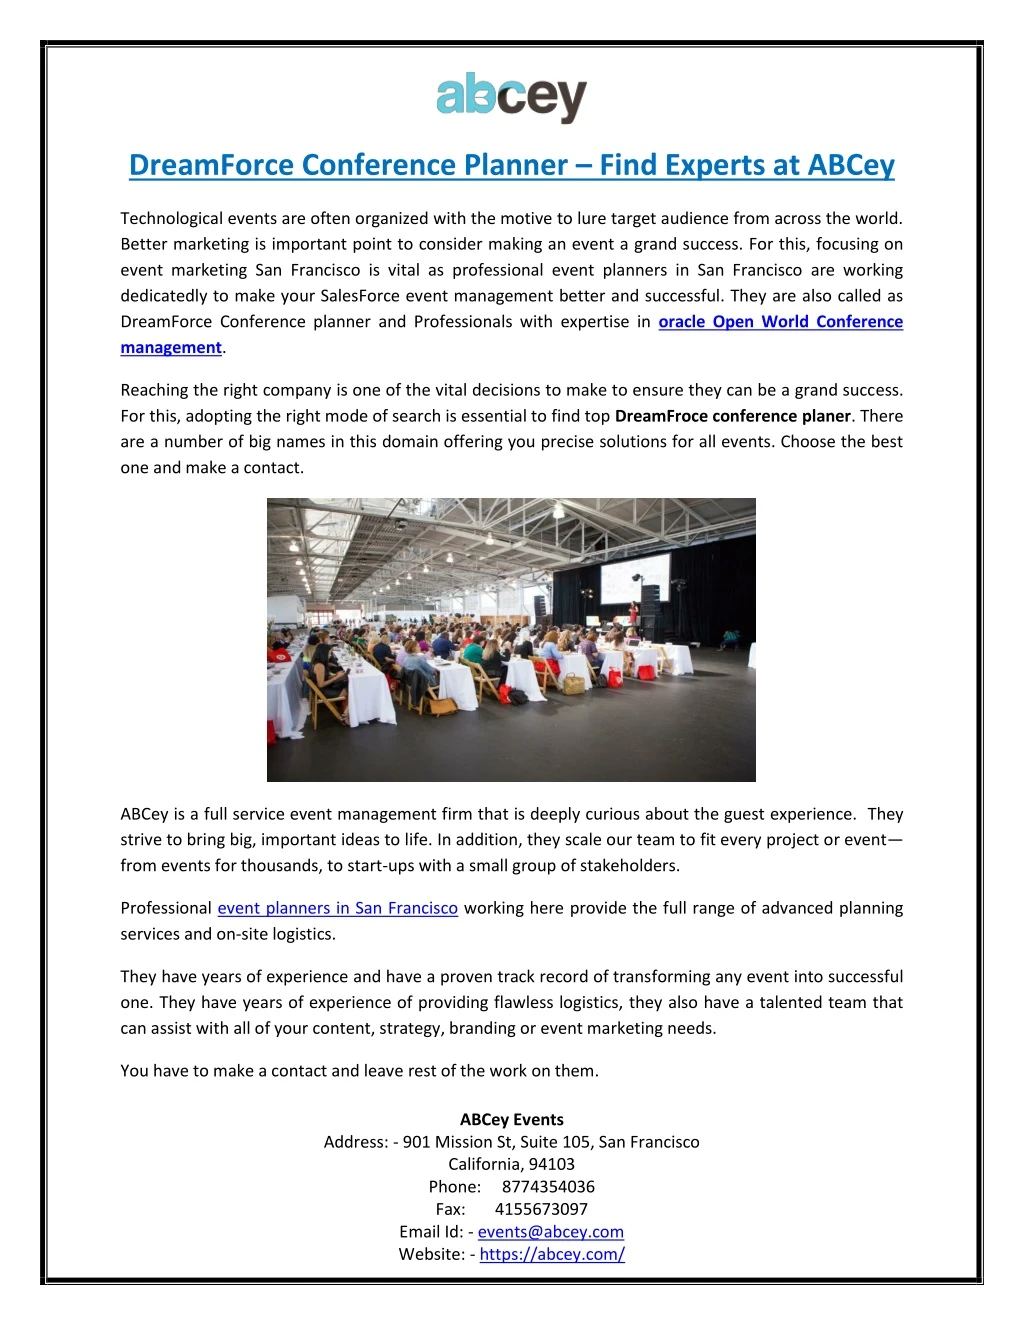 dreamforce conference planner find experts